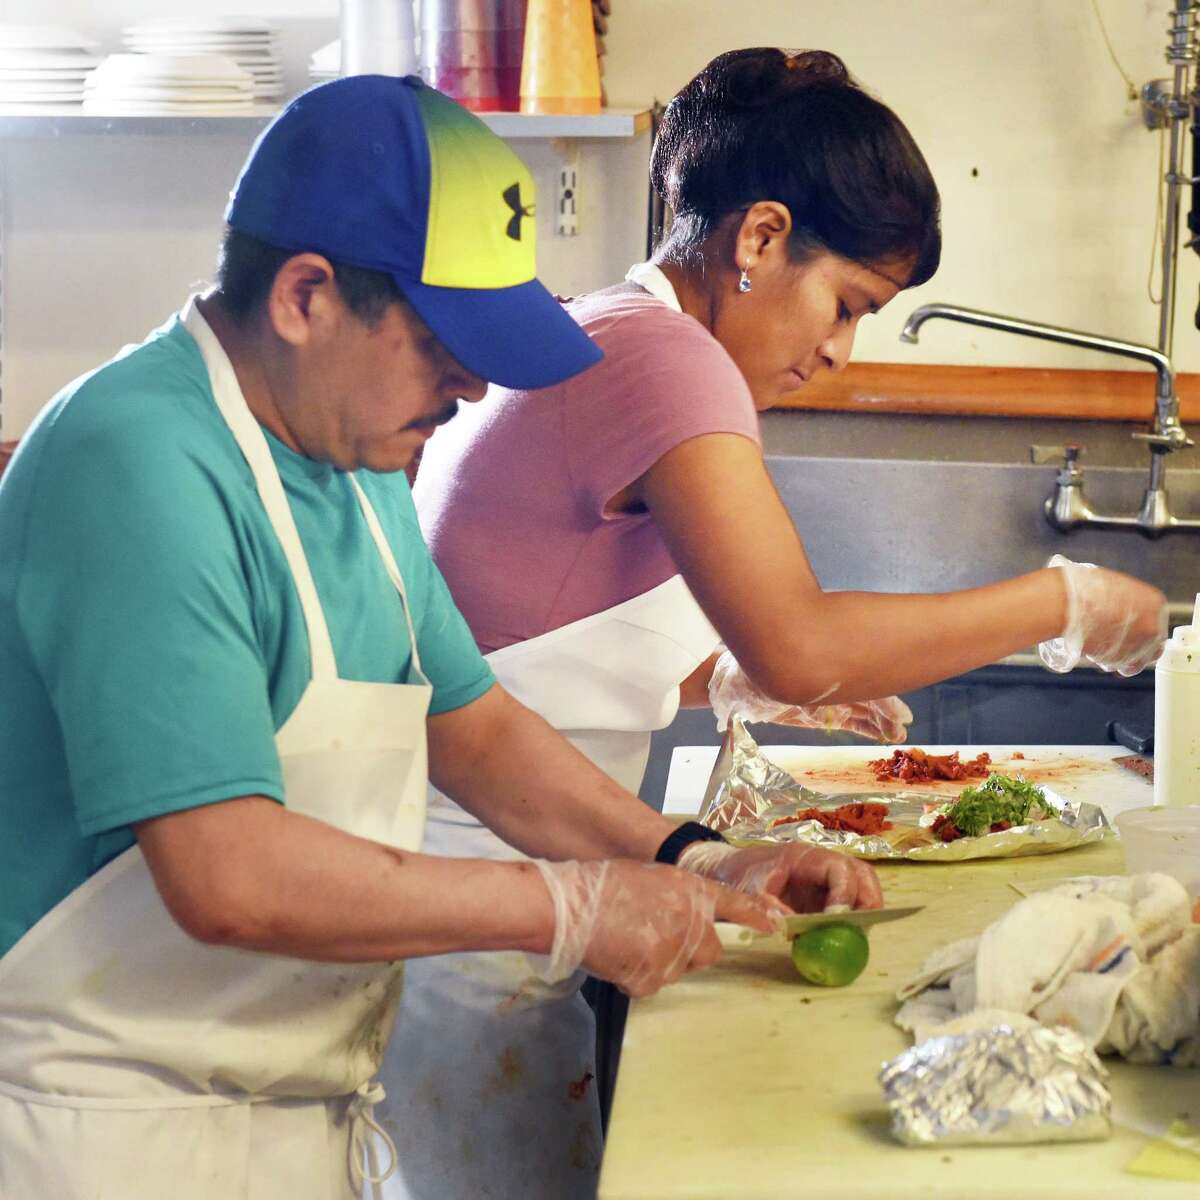 A man in a teal T-shirt, white apron and blue and yellow hat slices limes with gloved hands. A woman next to him in a mauve shirt and white apron tops tortillas with taco fillings.